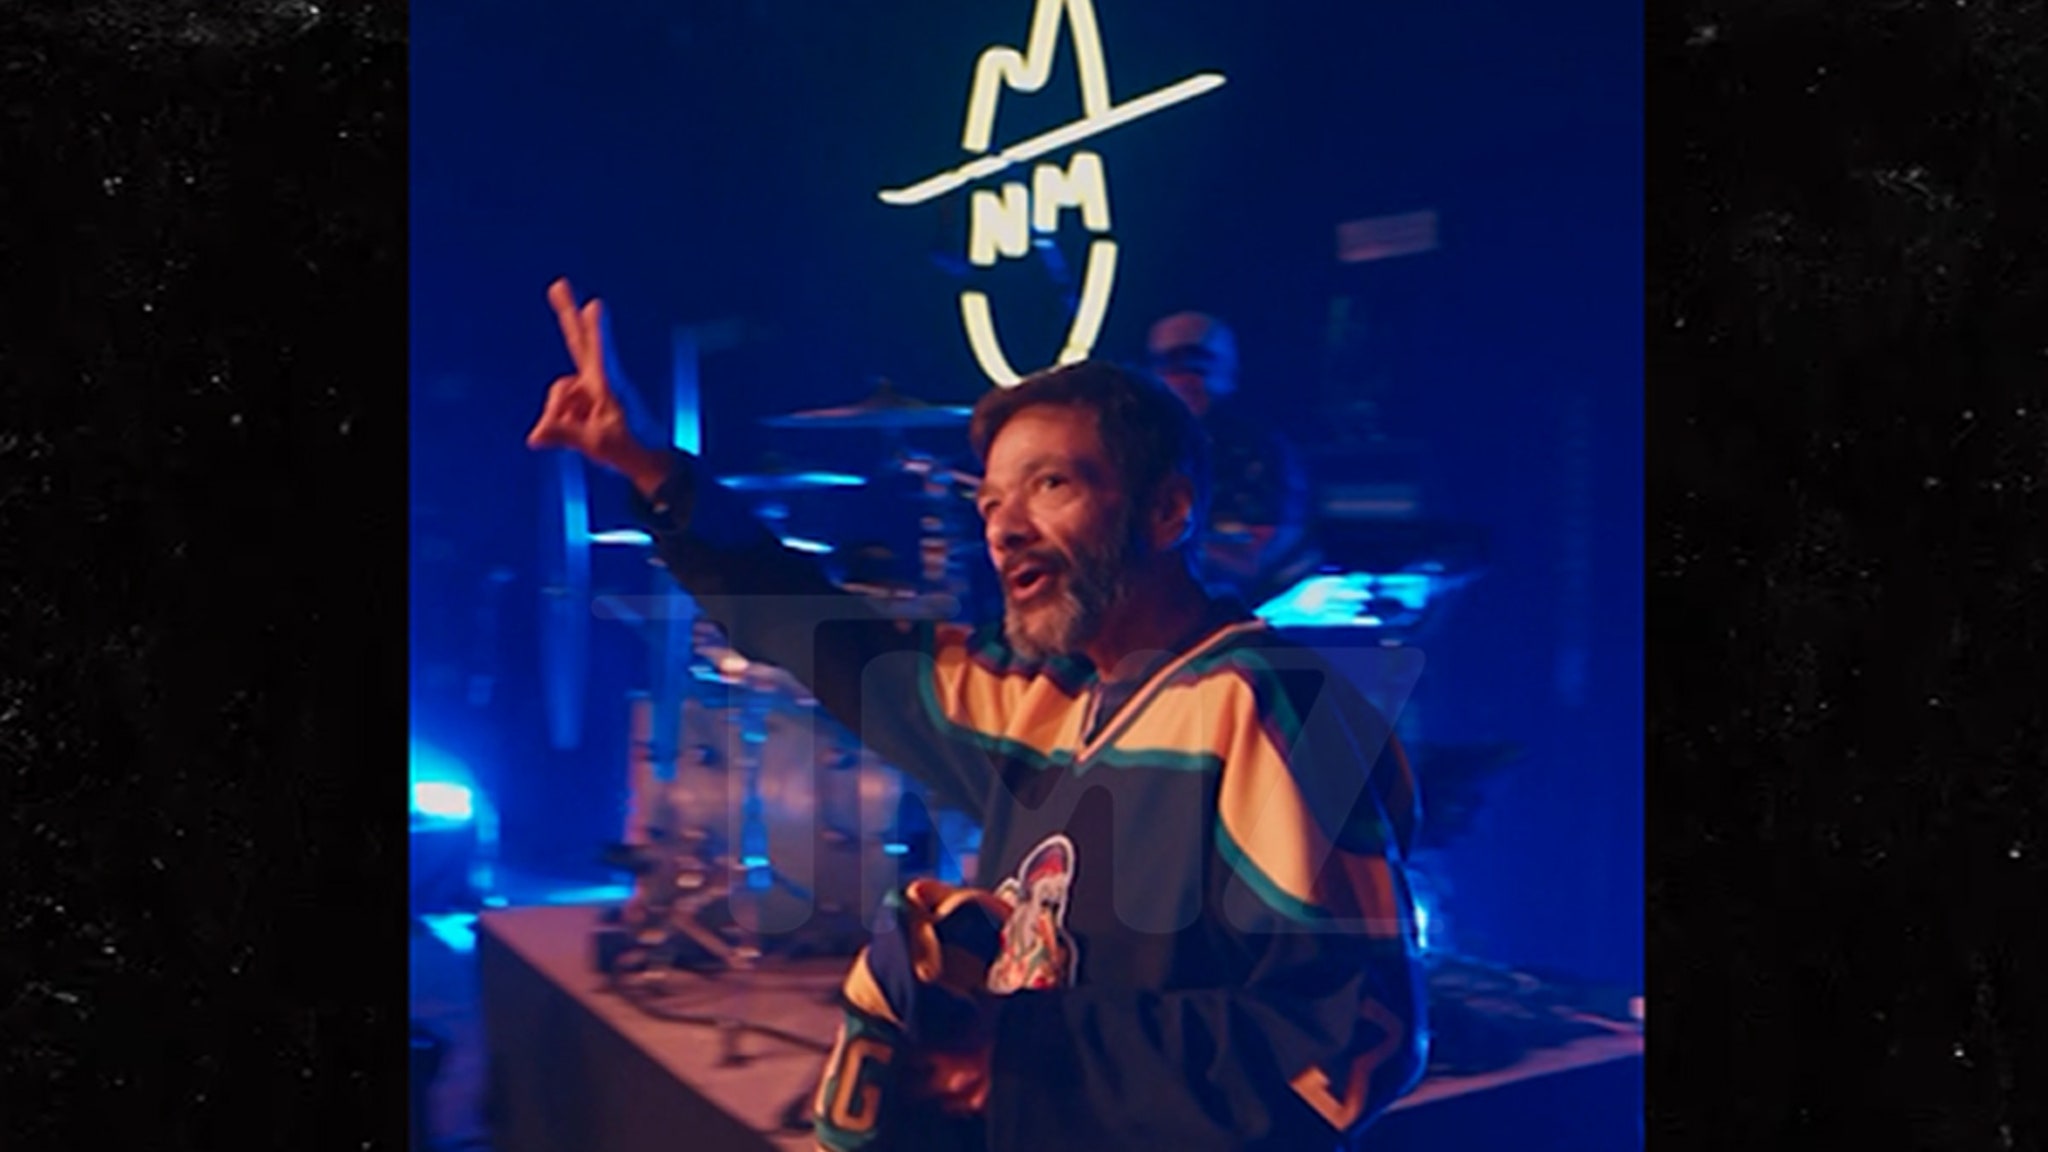 ‘Mighty Ducks’ Star Shaun Weiss Leads ‘Quack’ Chant at Concert